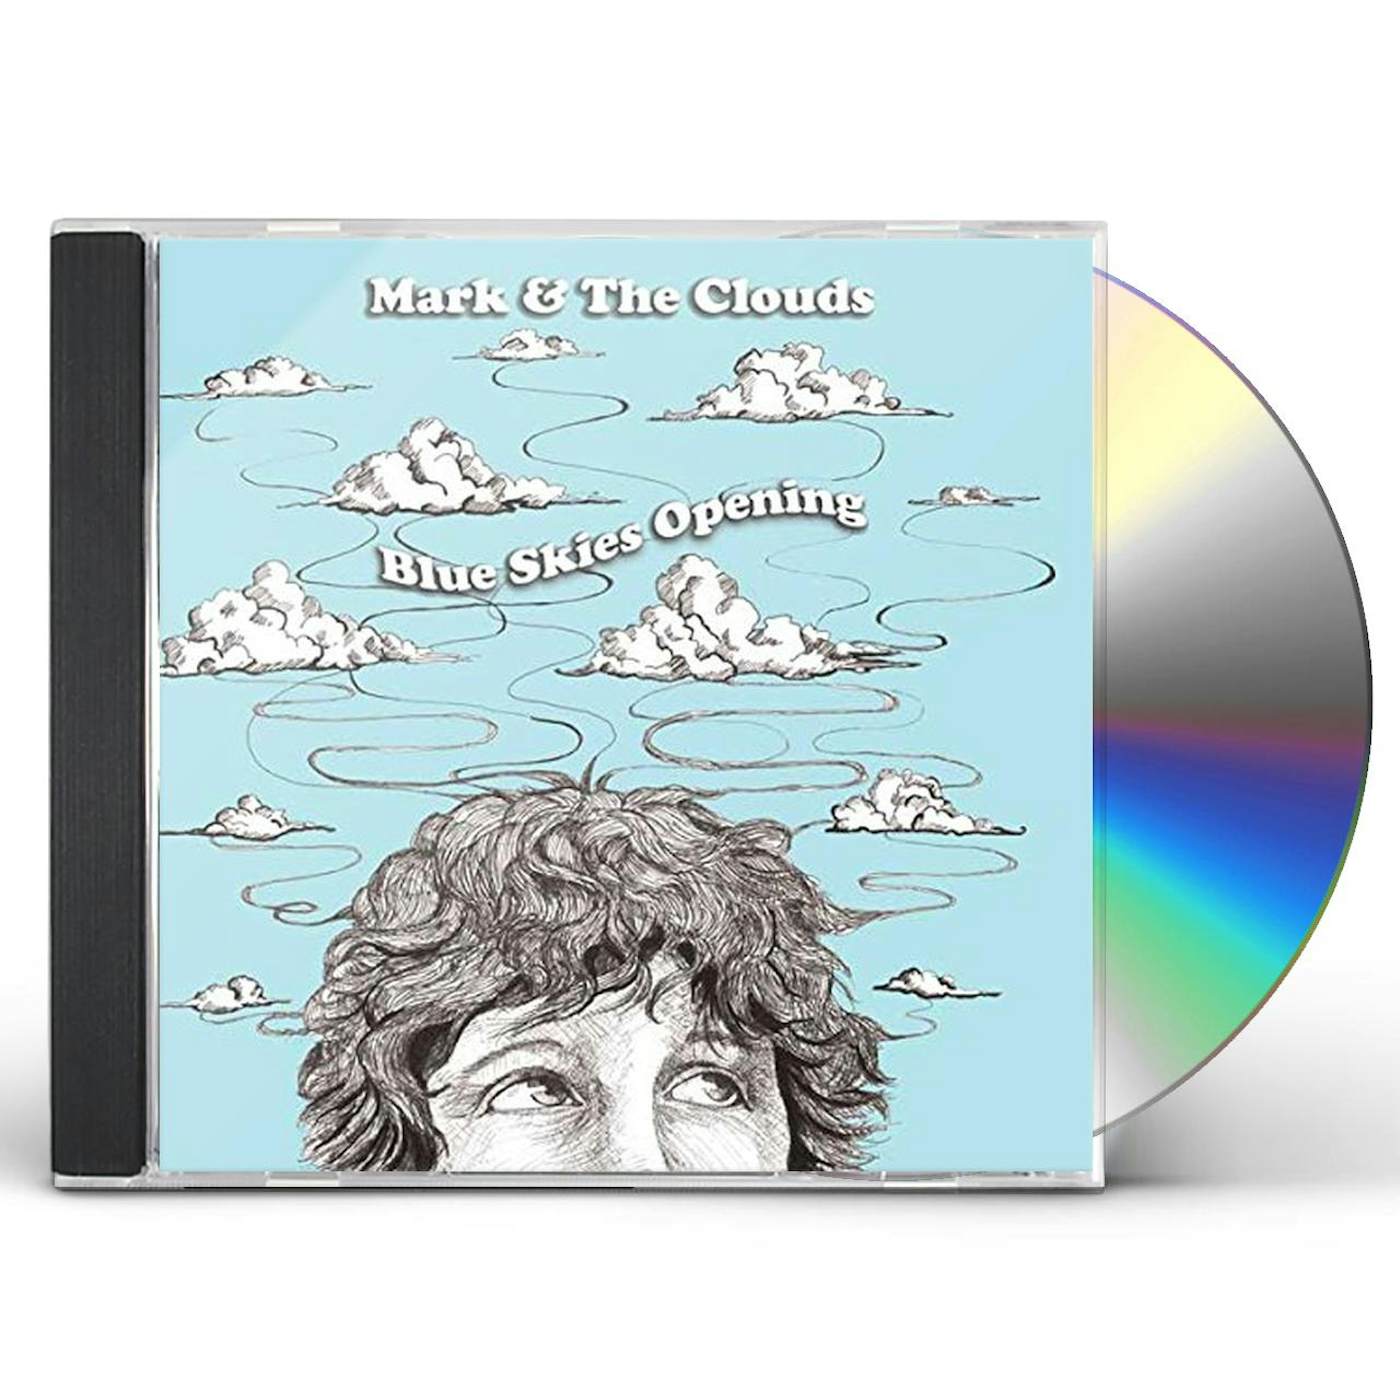 Mark & The Clouds BLUE SKIES OPENING CD